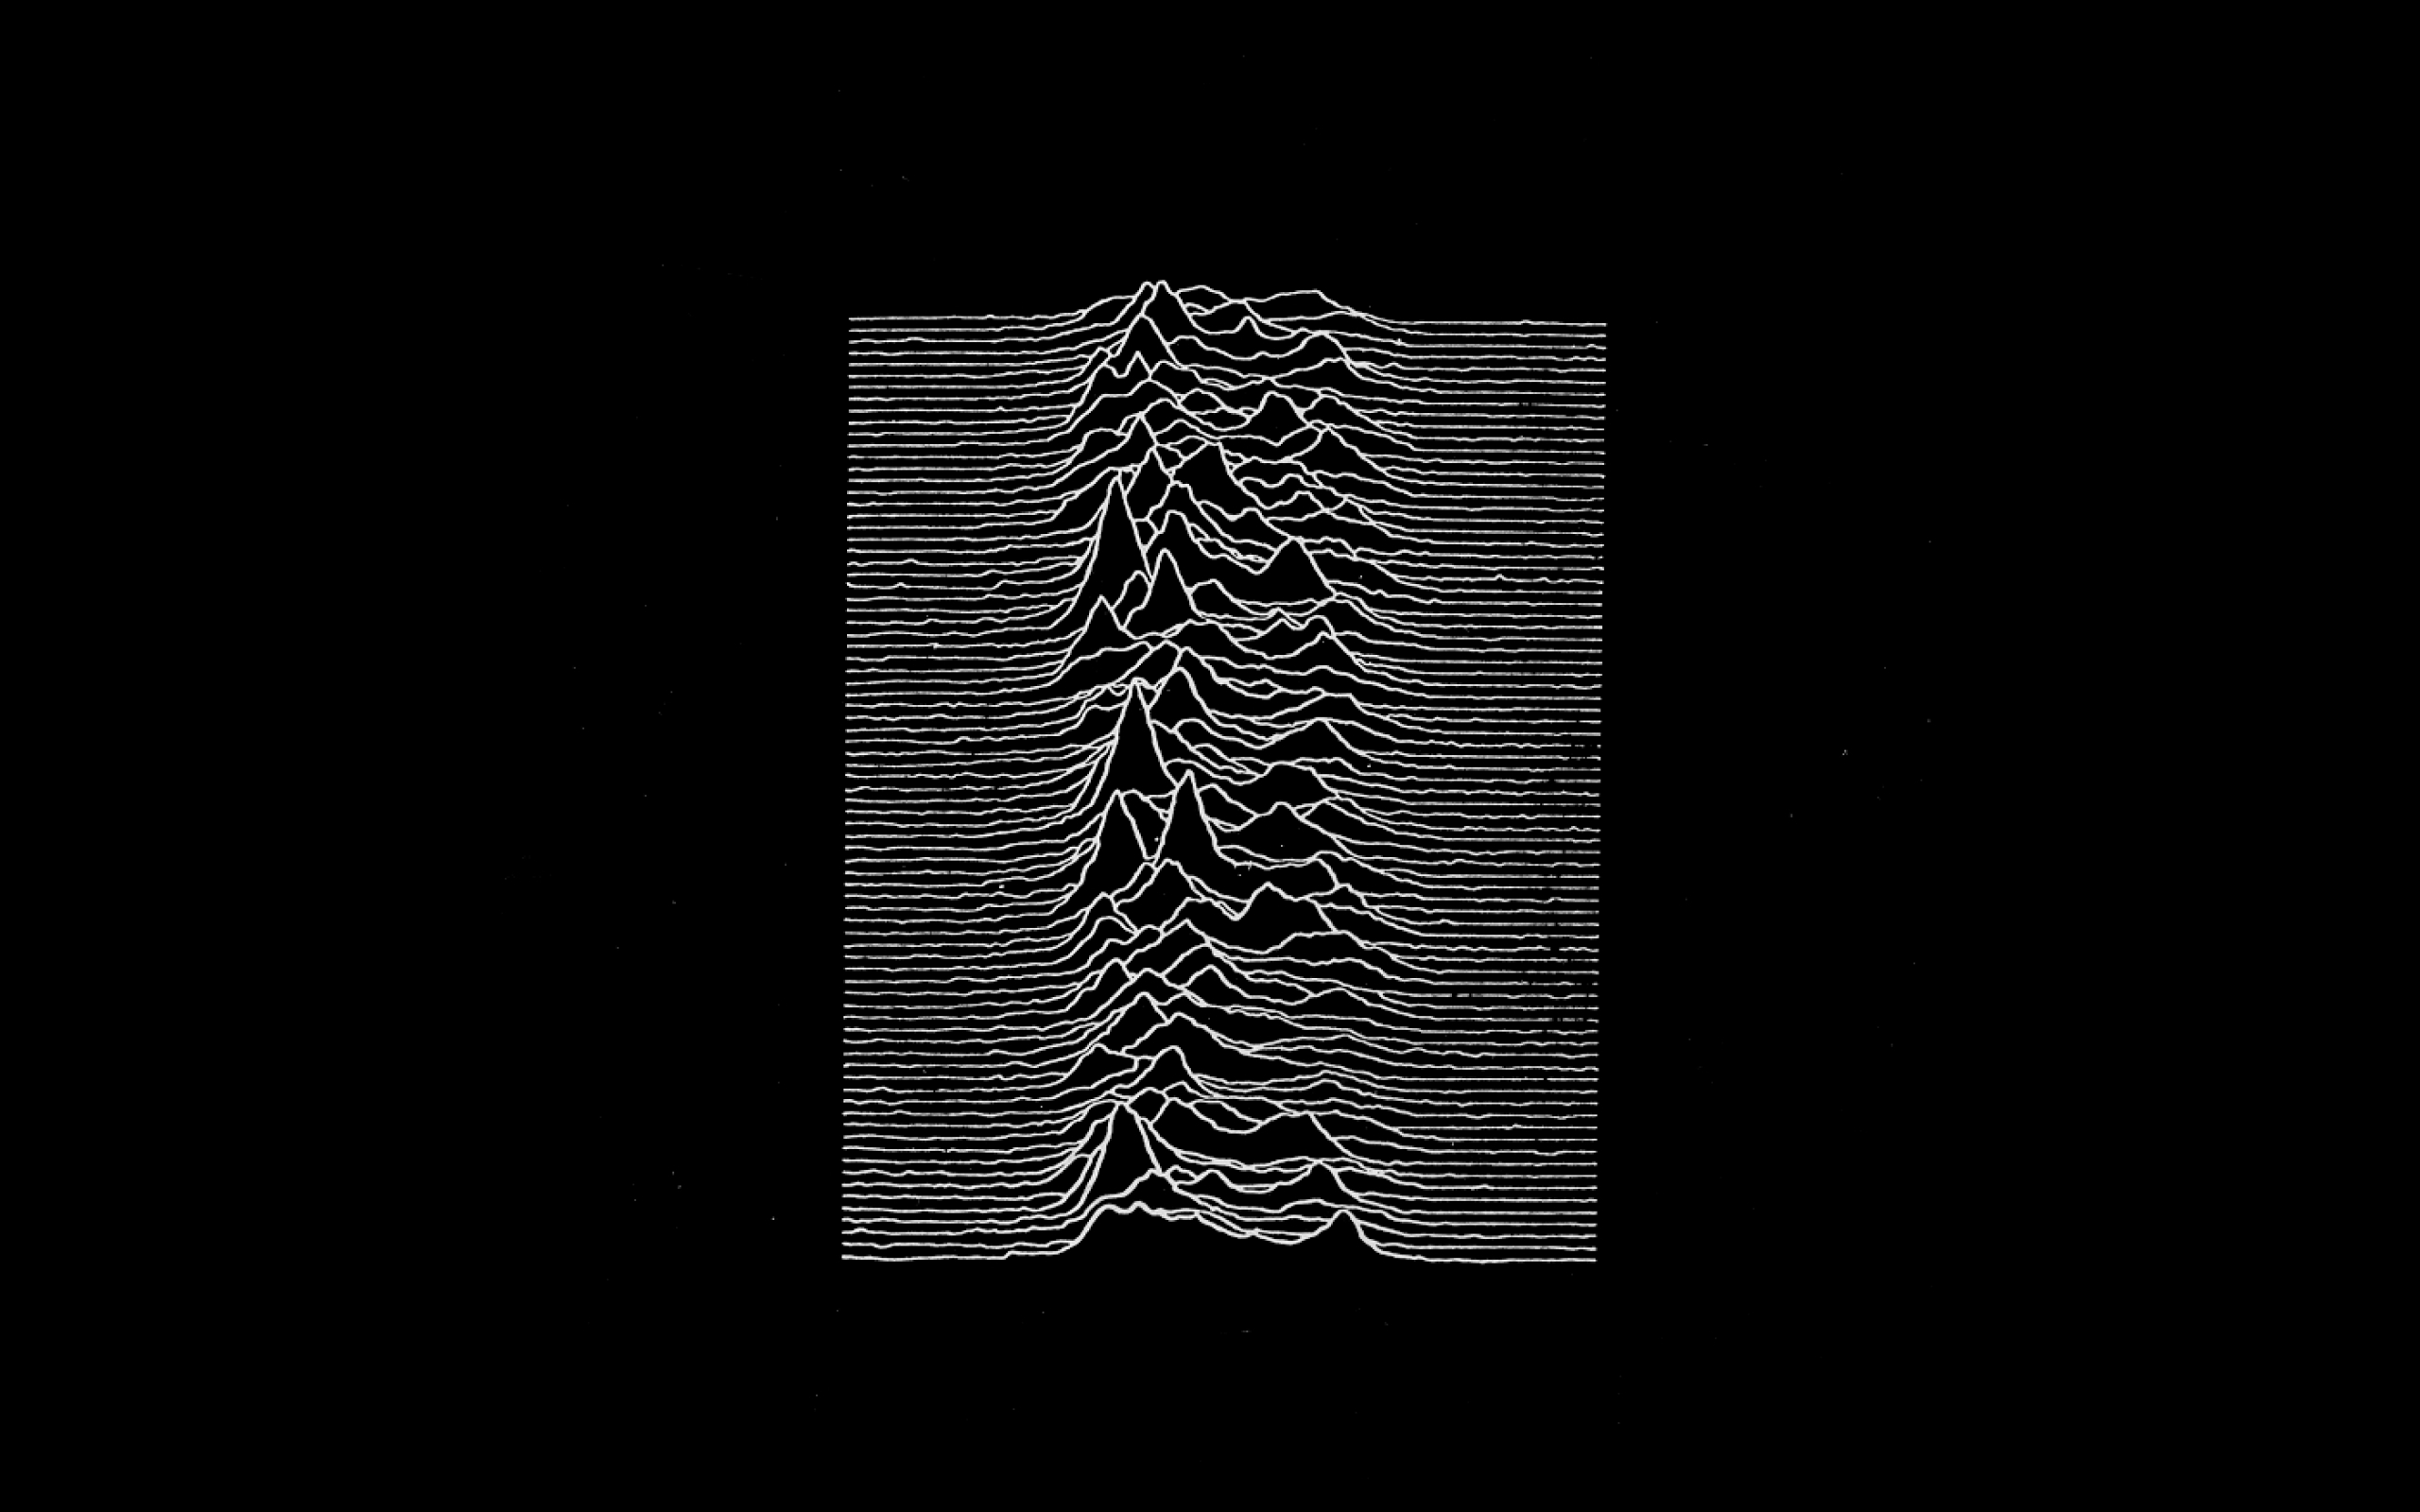 Download Wallpapers Download 2560x1600 grayscale joy division graph 2560x1600